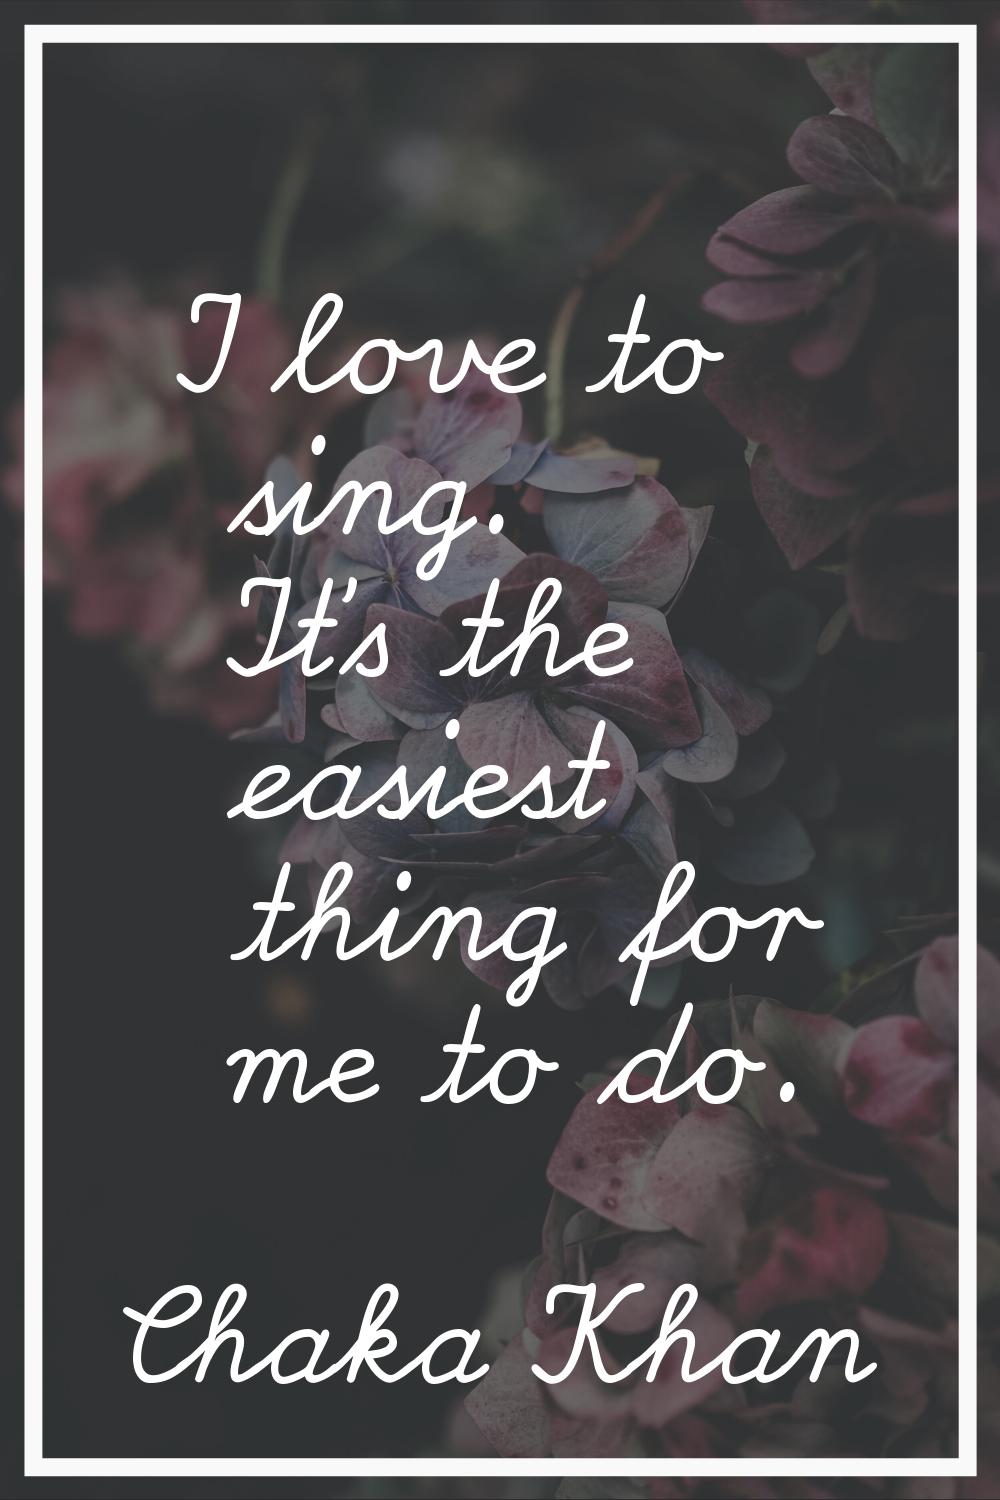 I love to sing. It's the easiest thing for me to do.